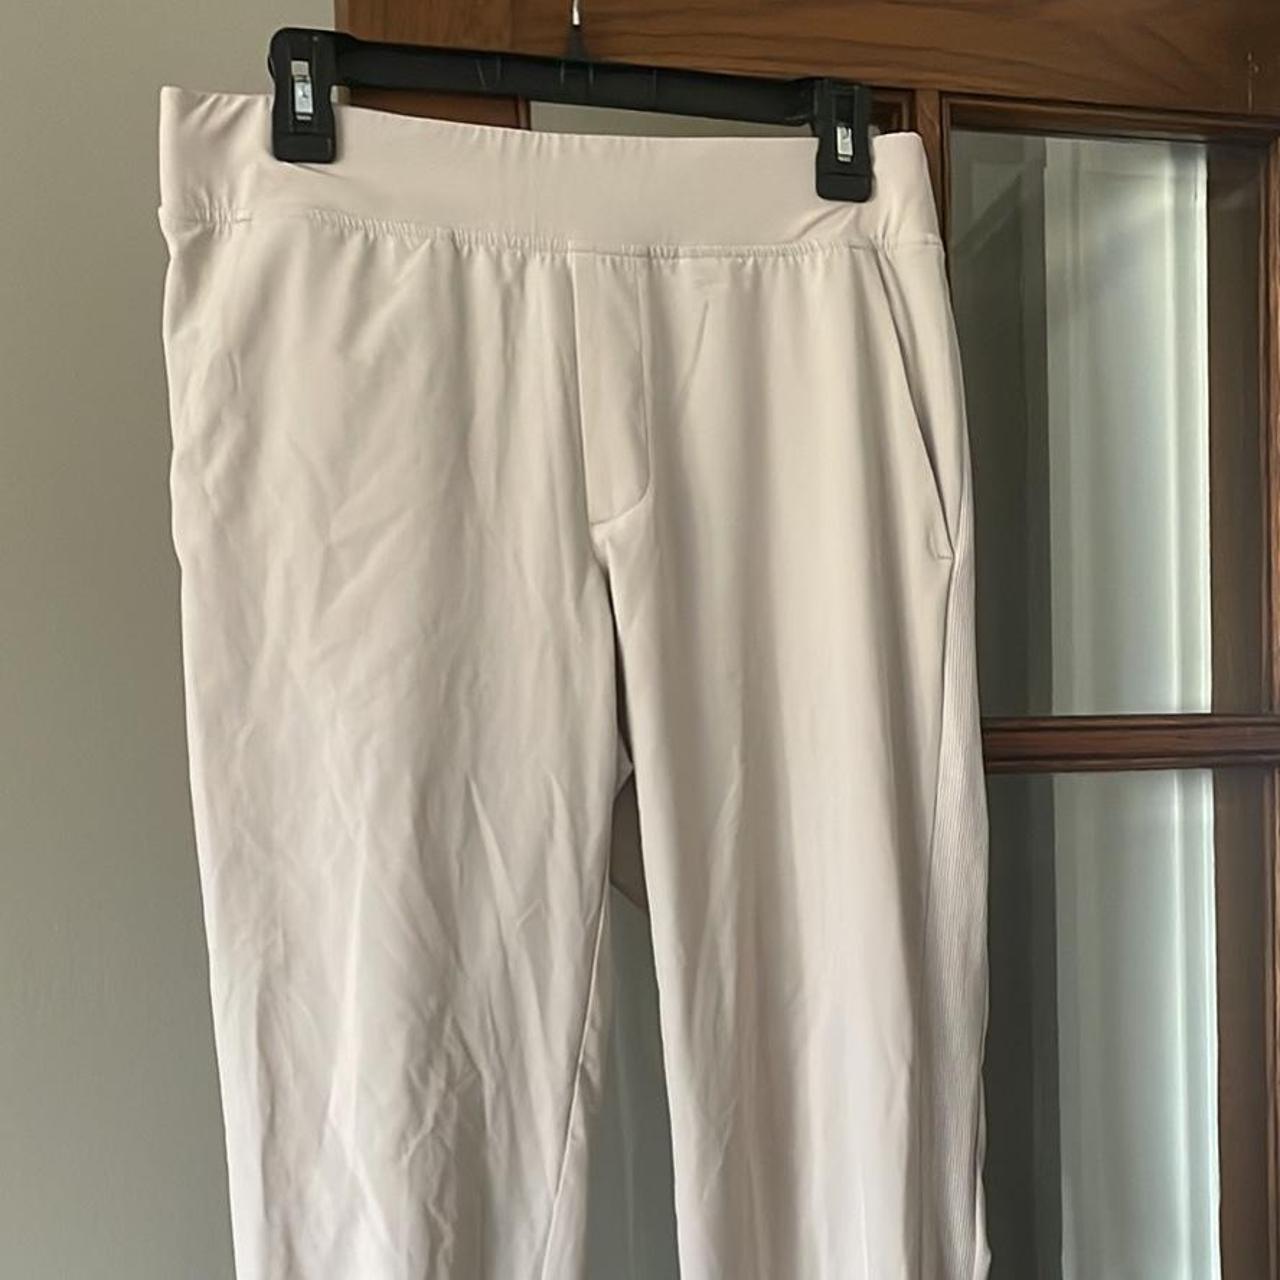 Athleta Brooklyn Ankle Pant in Abalone Grey - Size 10 – Chic Boutique  Consignments